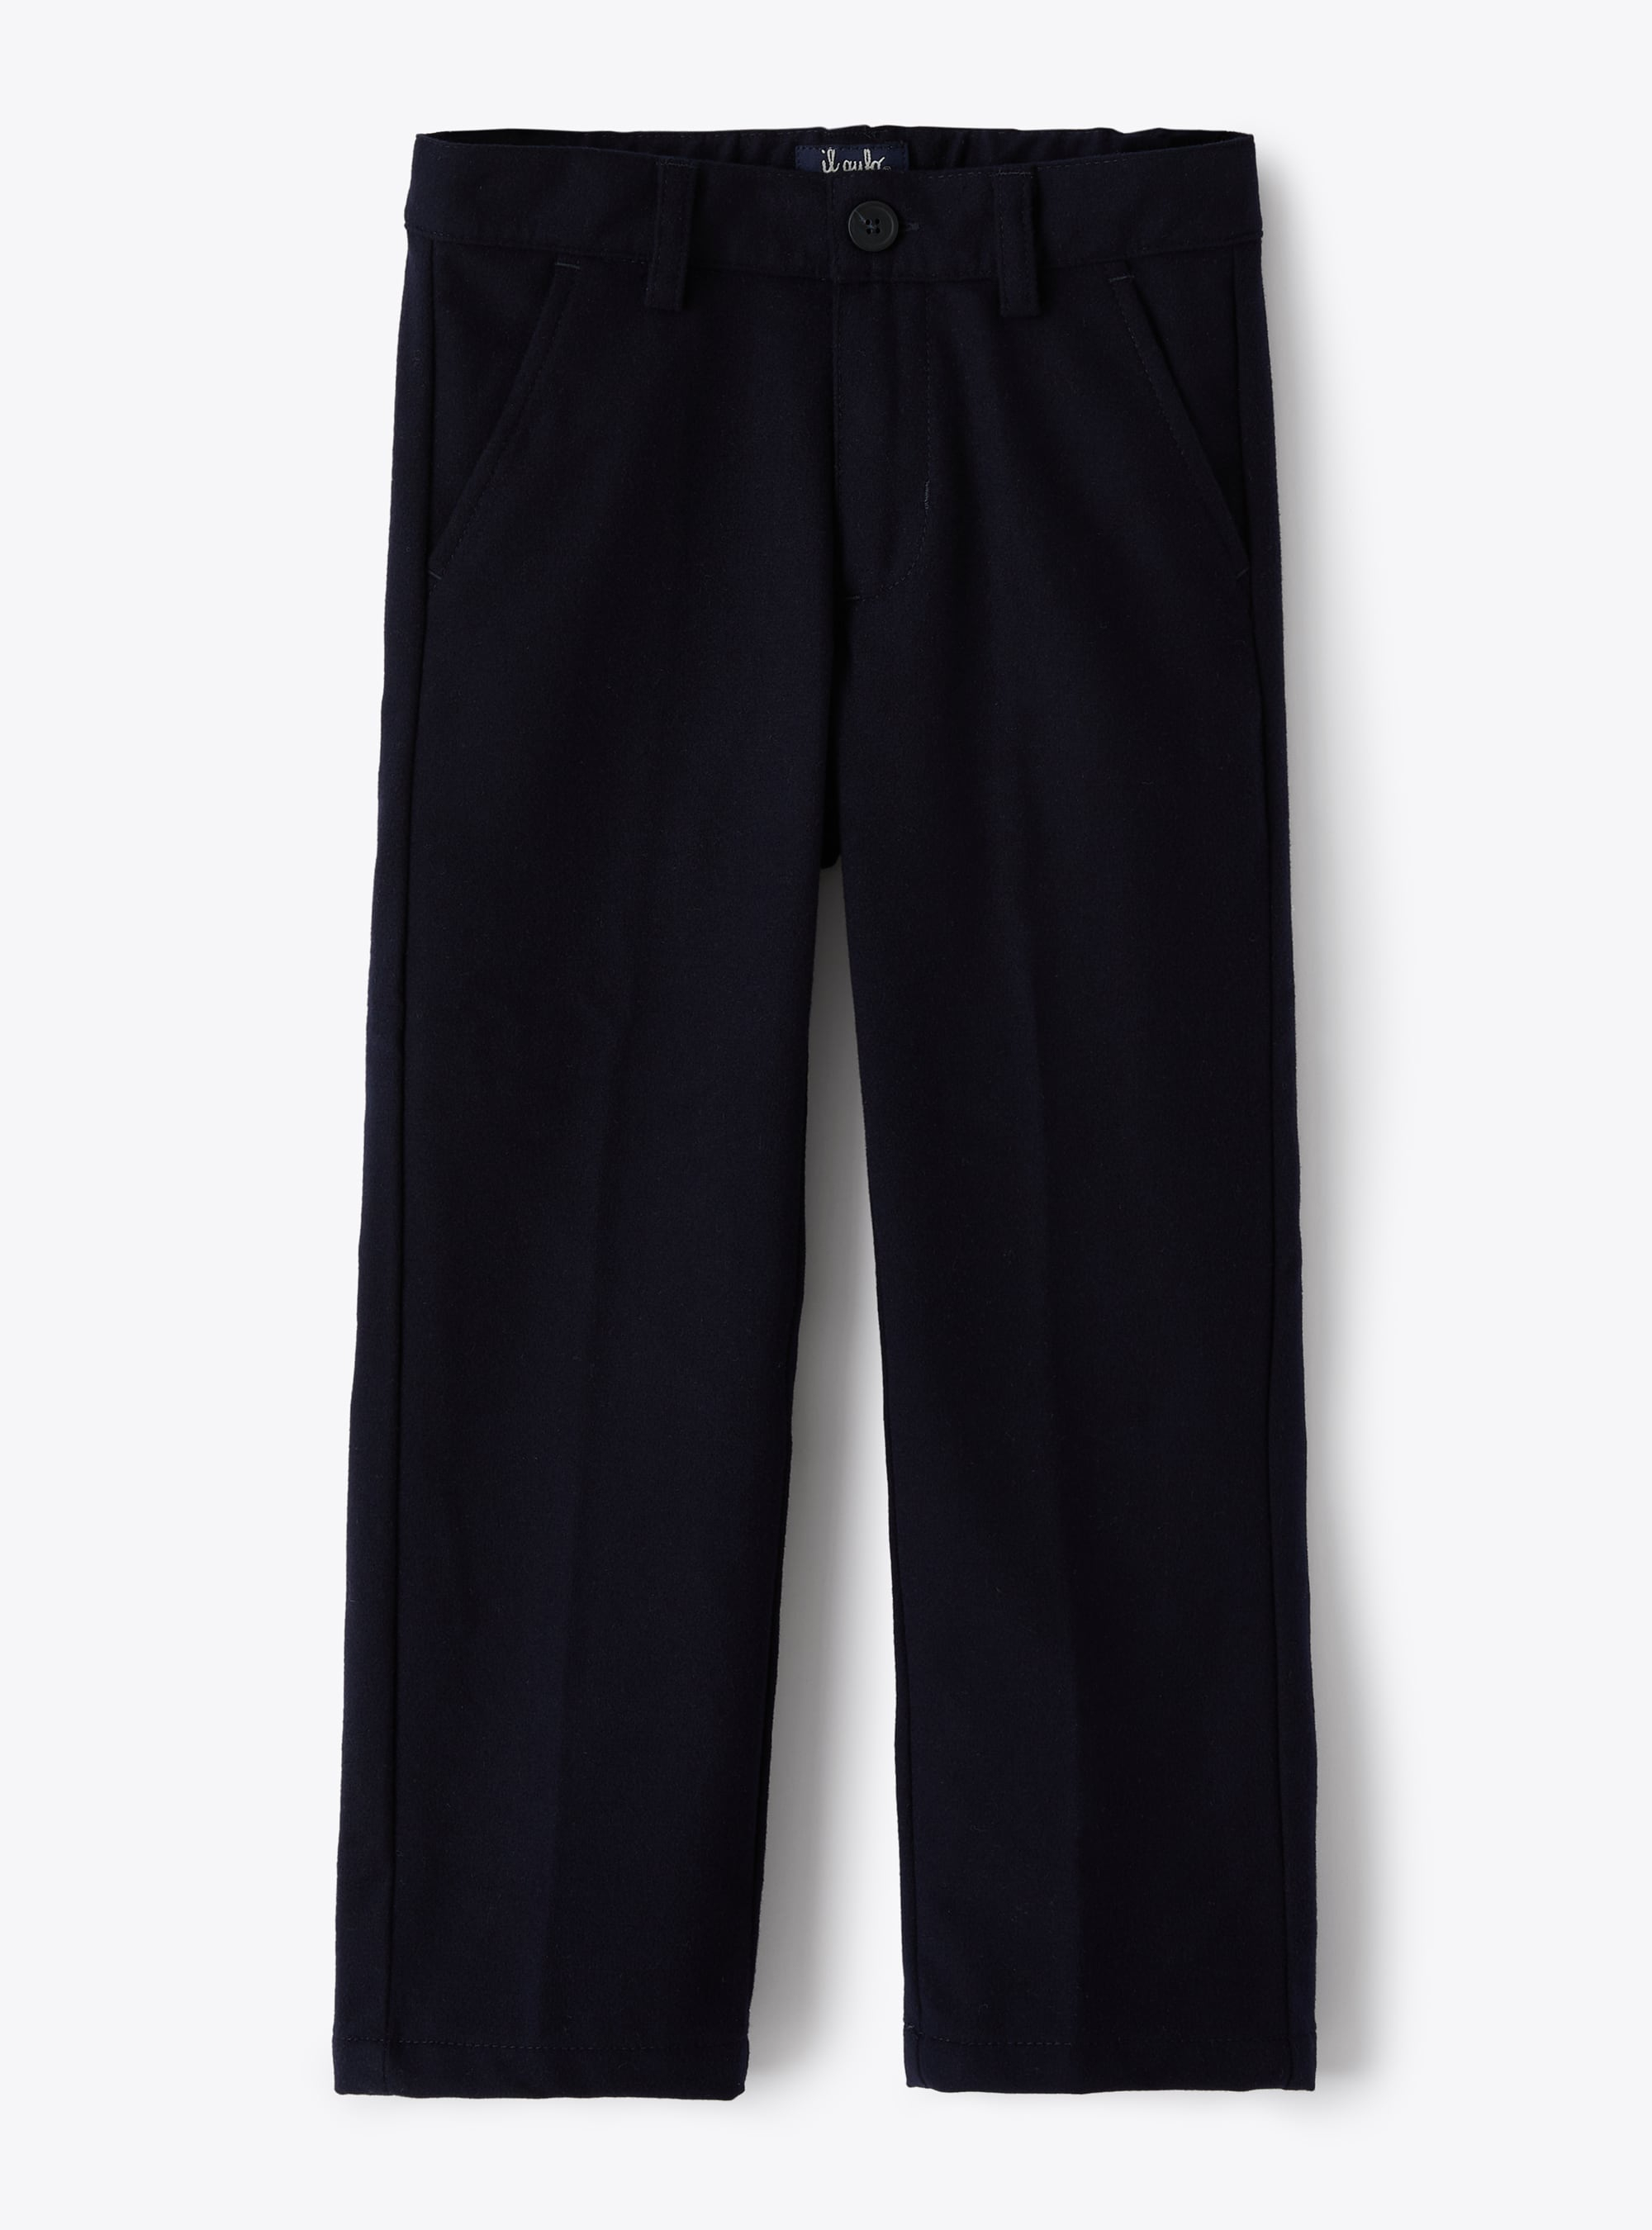 Classic-style trousers in blue technowool - Trousers - Il Gufo